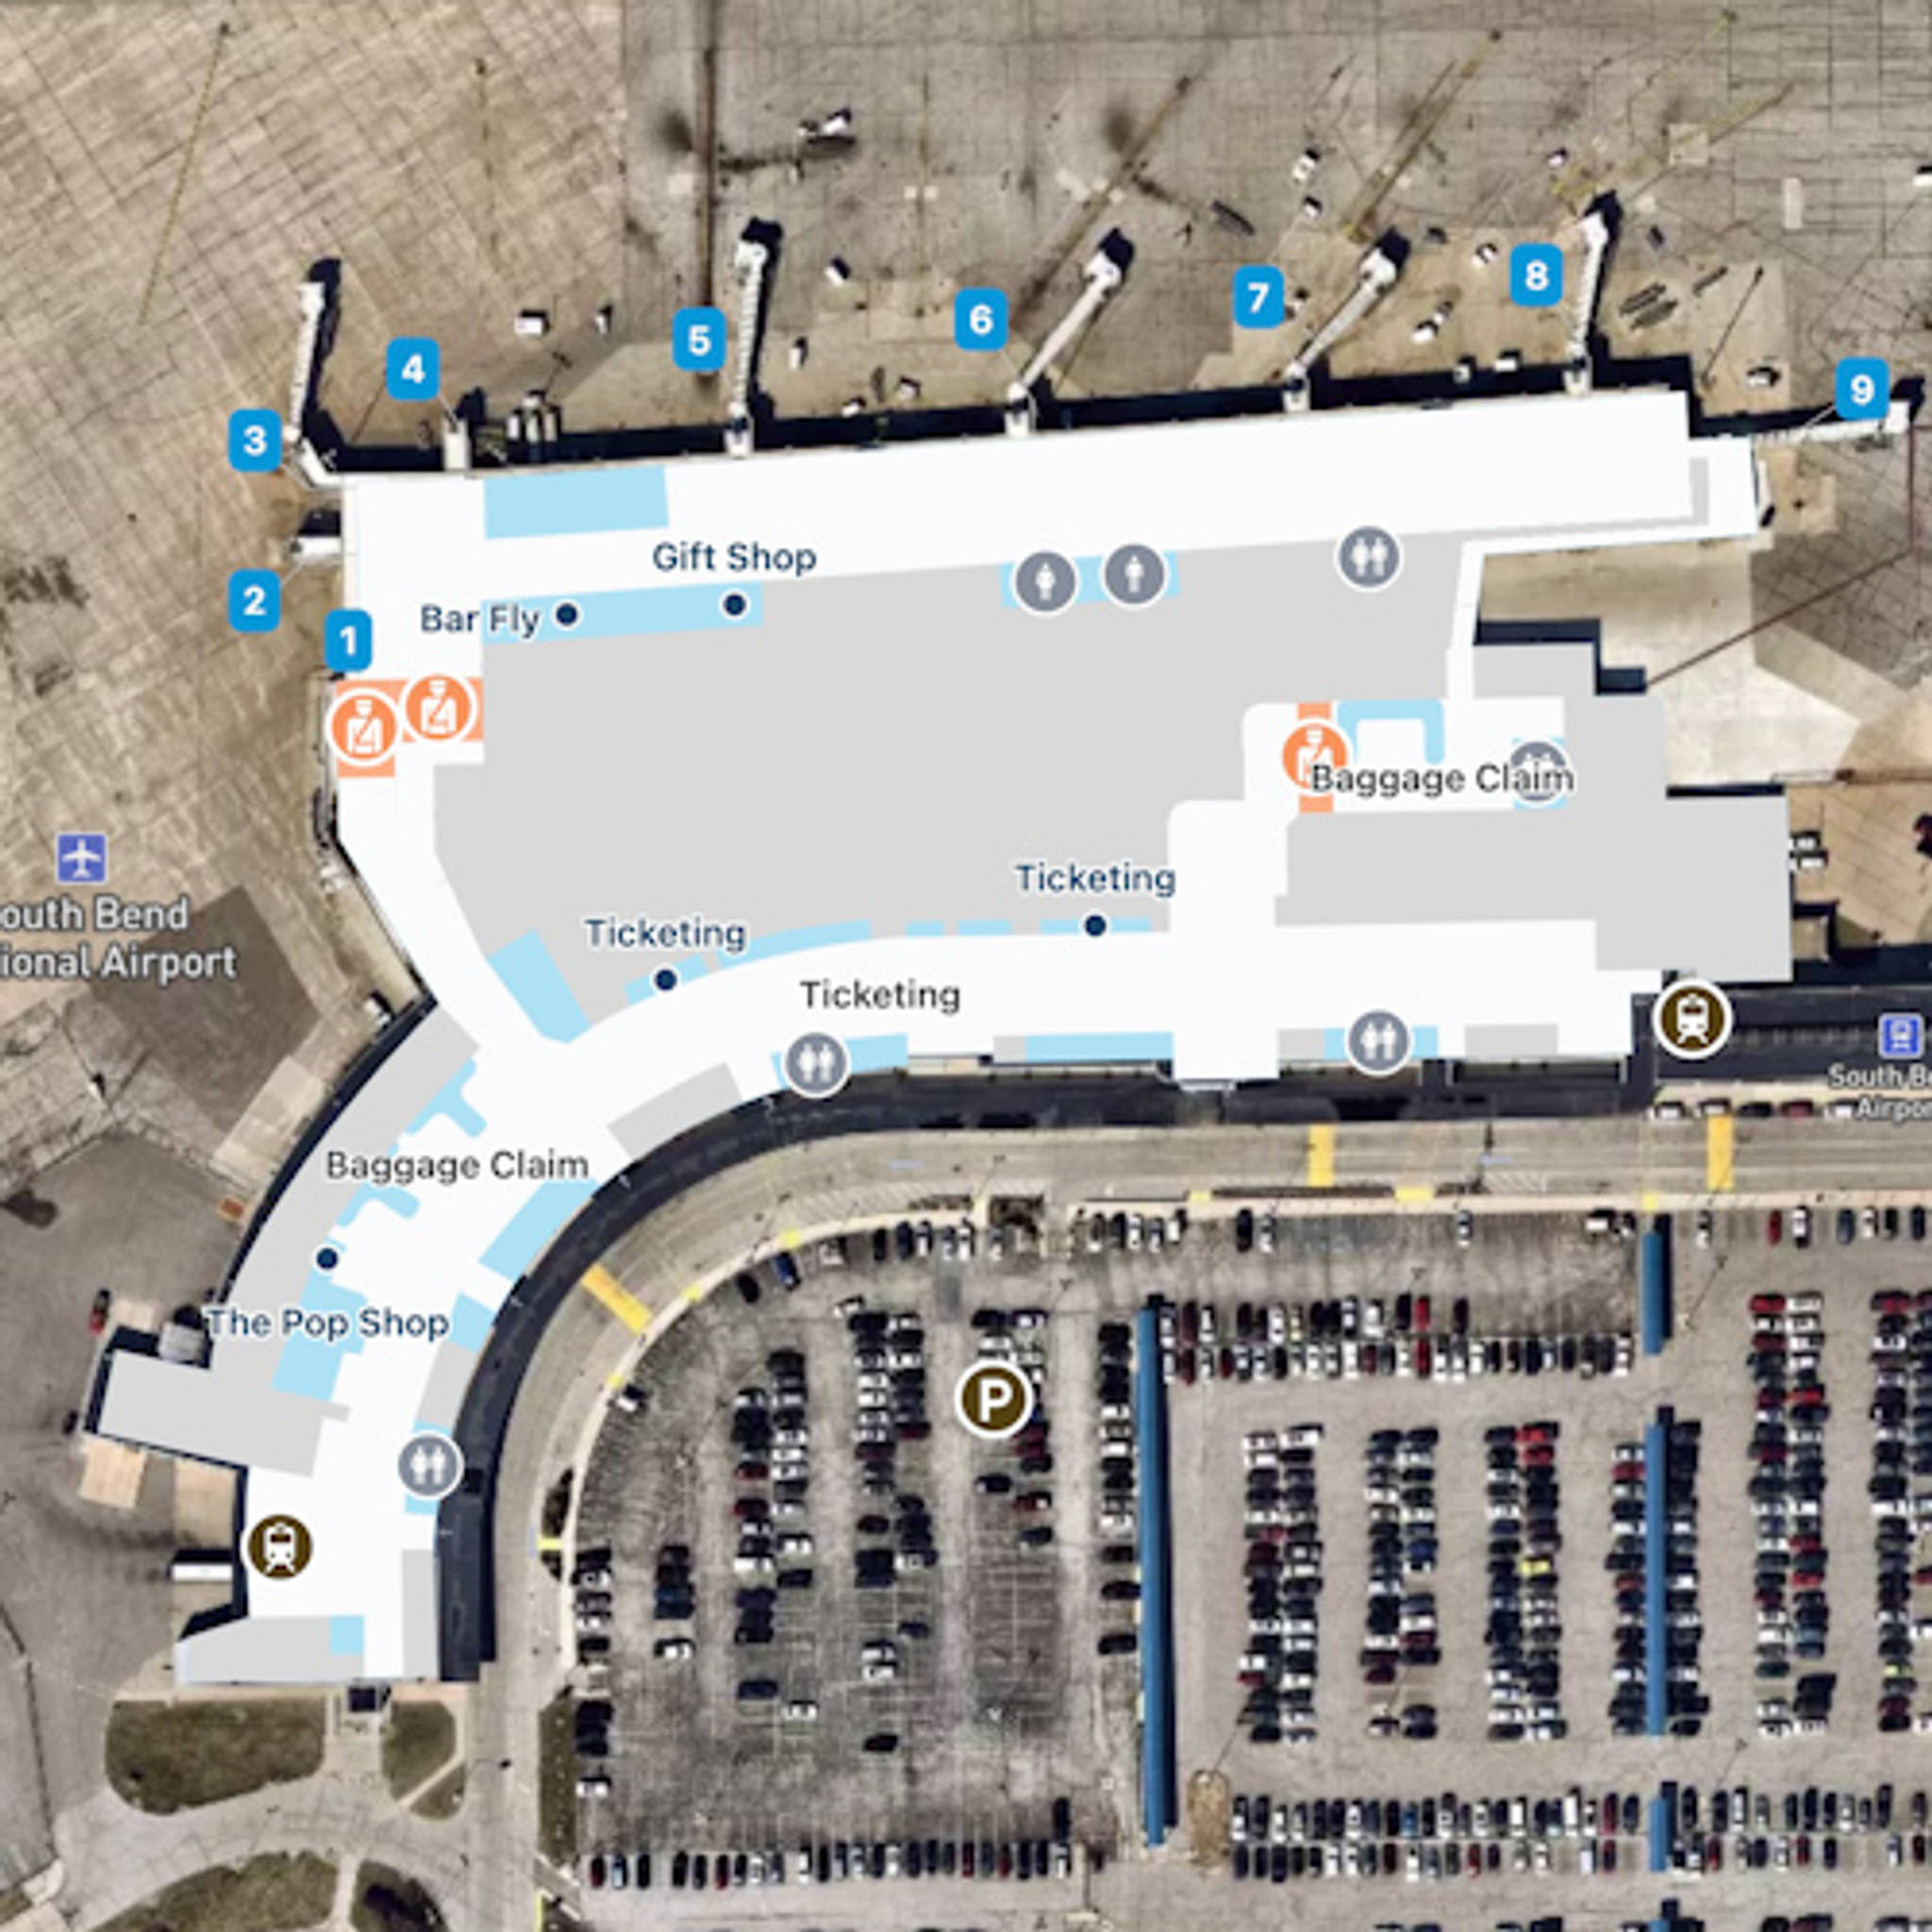 South Bend Regional Airport SBN Terminal Overview Map